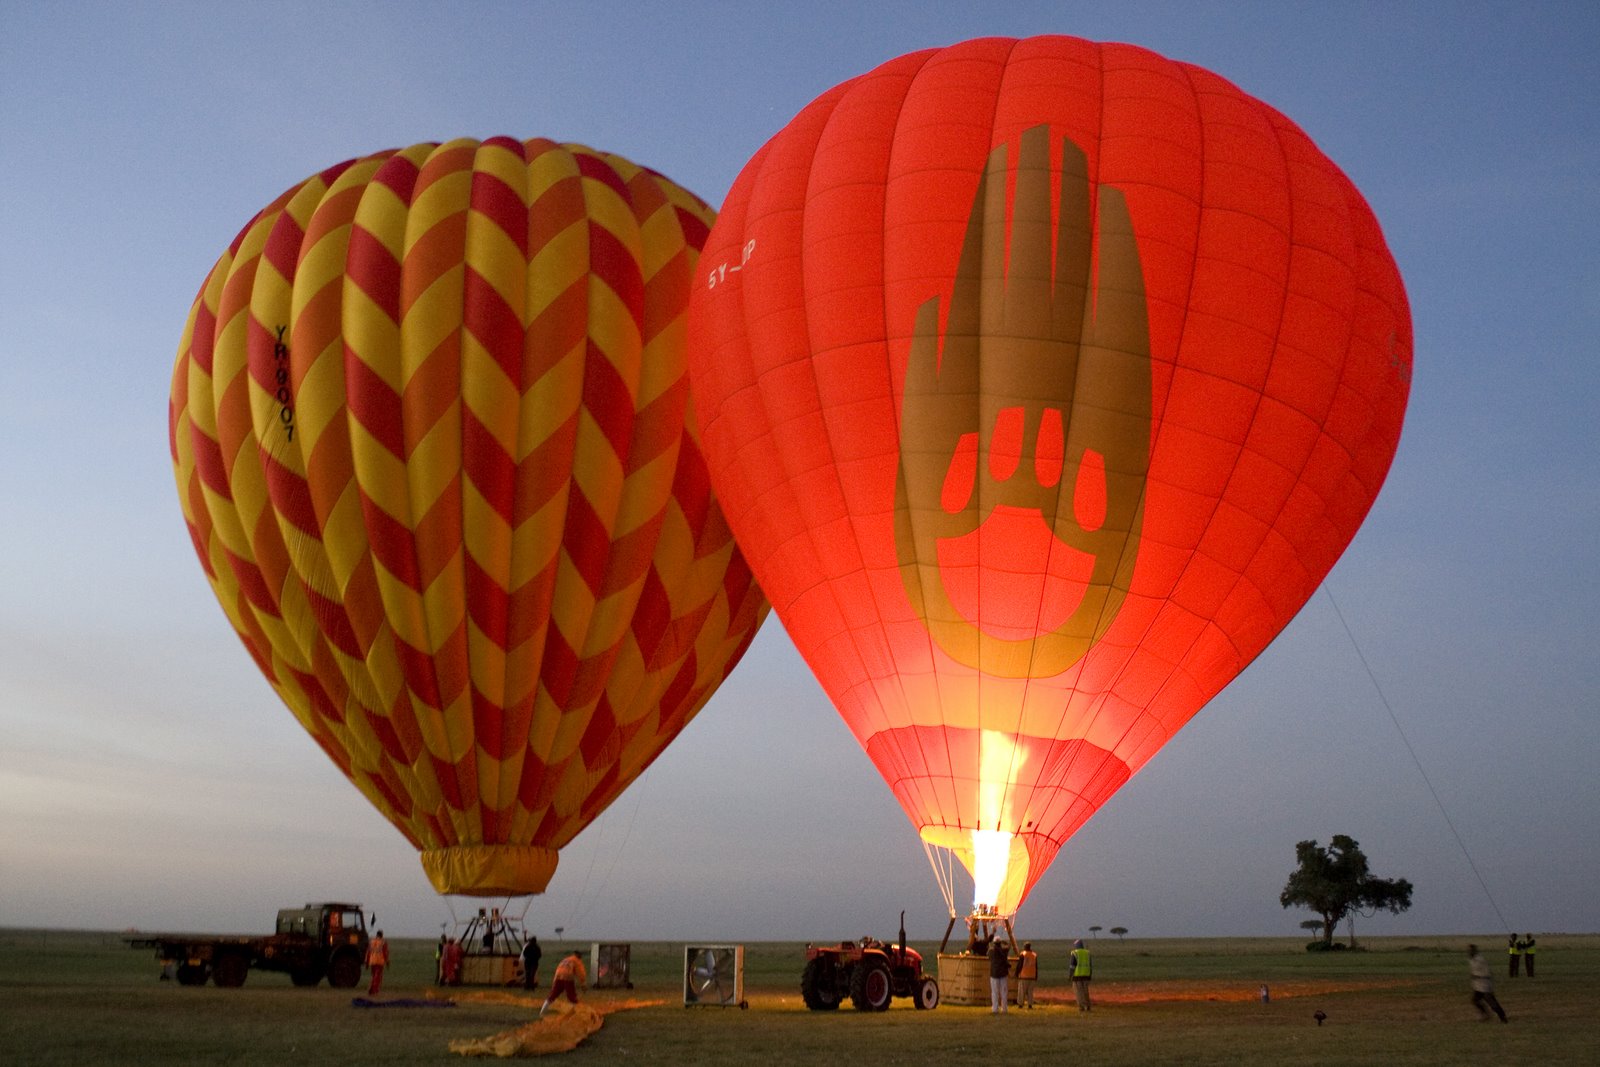 7. If you take a hot air balloon ride, you will get a glimpse of the real b...